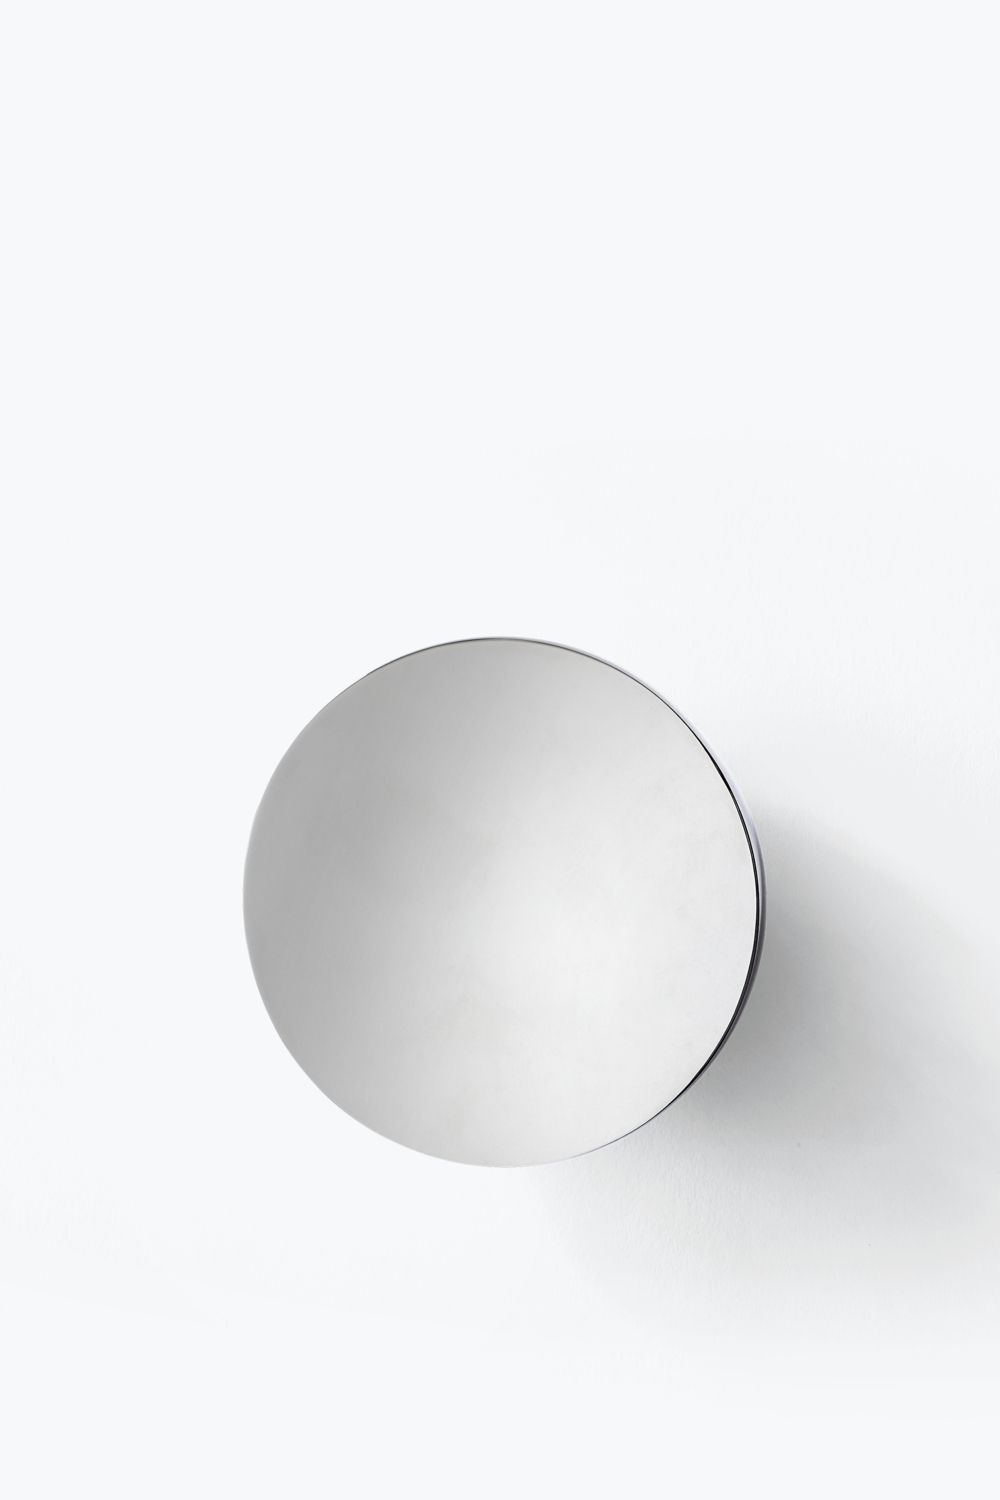 Stainless Steel Wall Mirrors In Fashionable Aura Wall Mirror – Stainless Steel, Large — New Works (View 7 of 20)